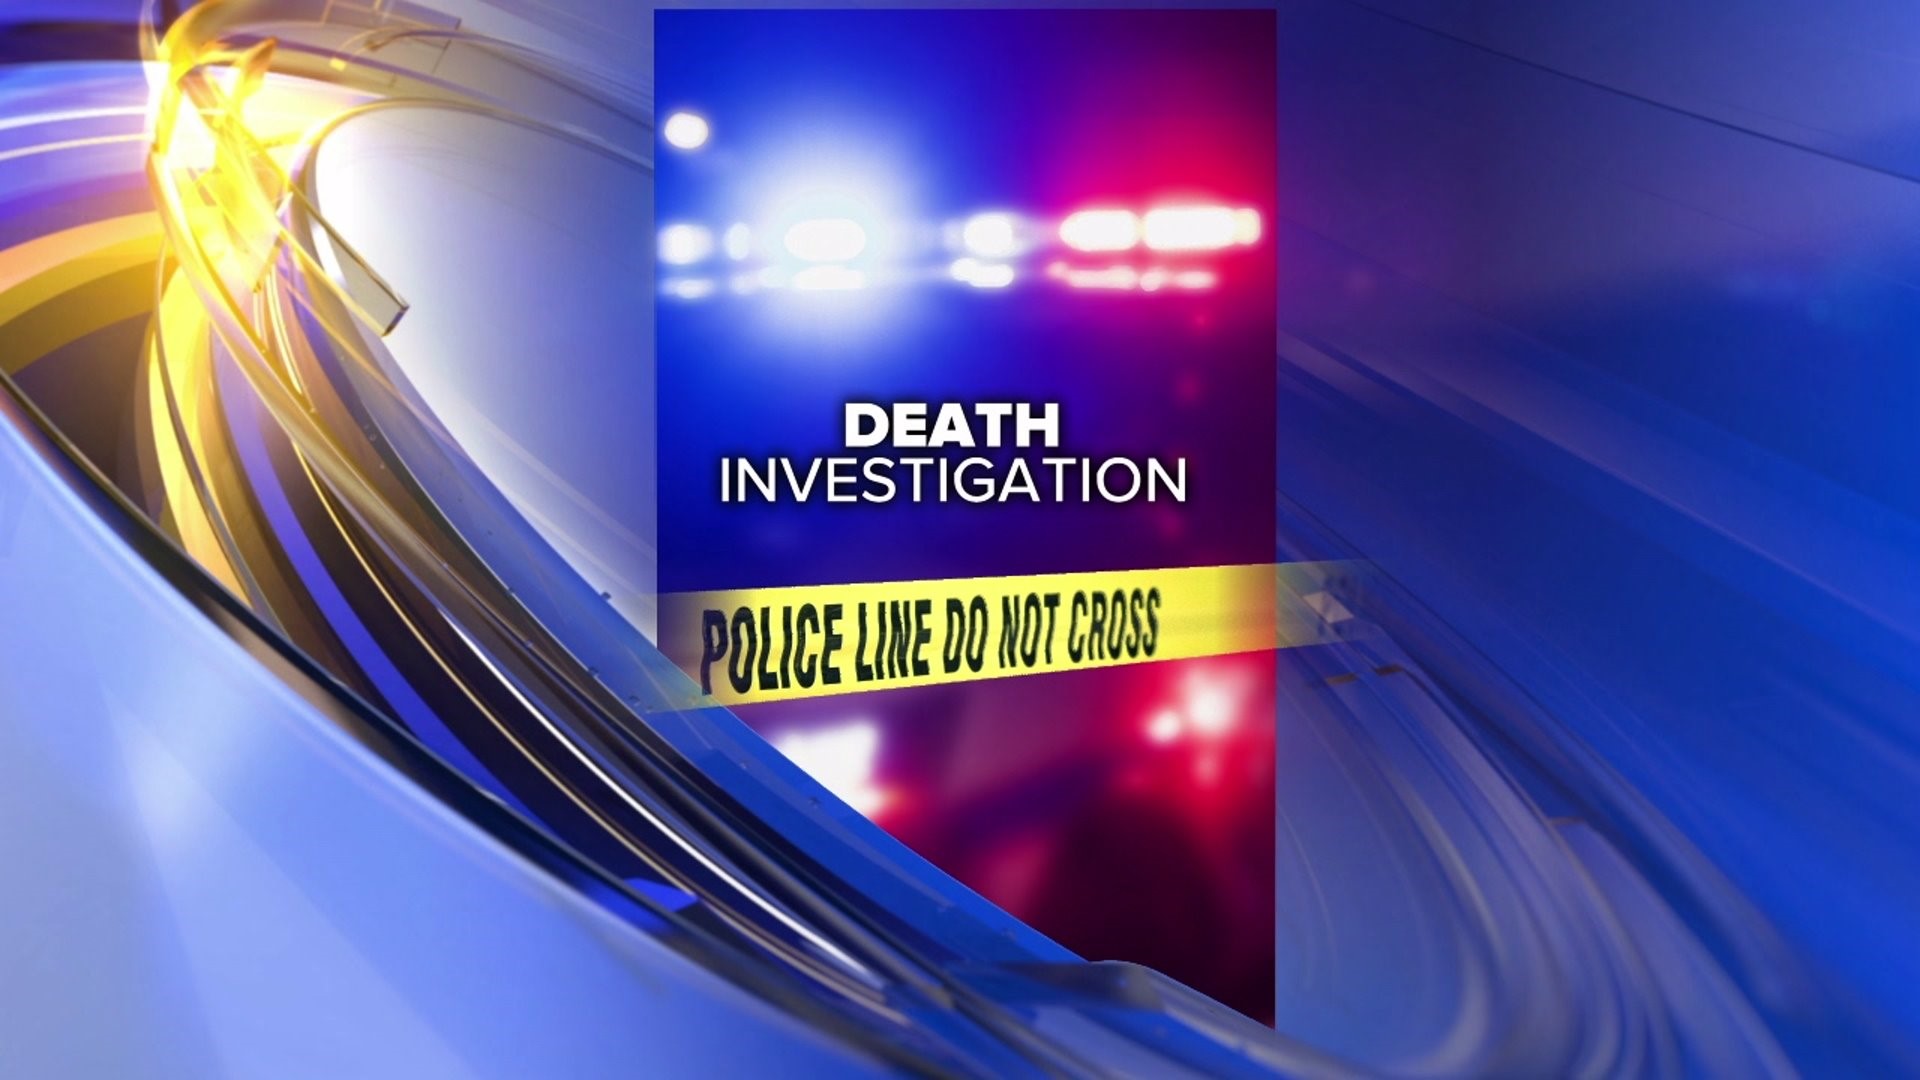 The child was found unresponsive on Tuesday.